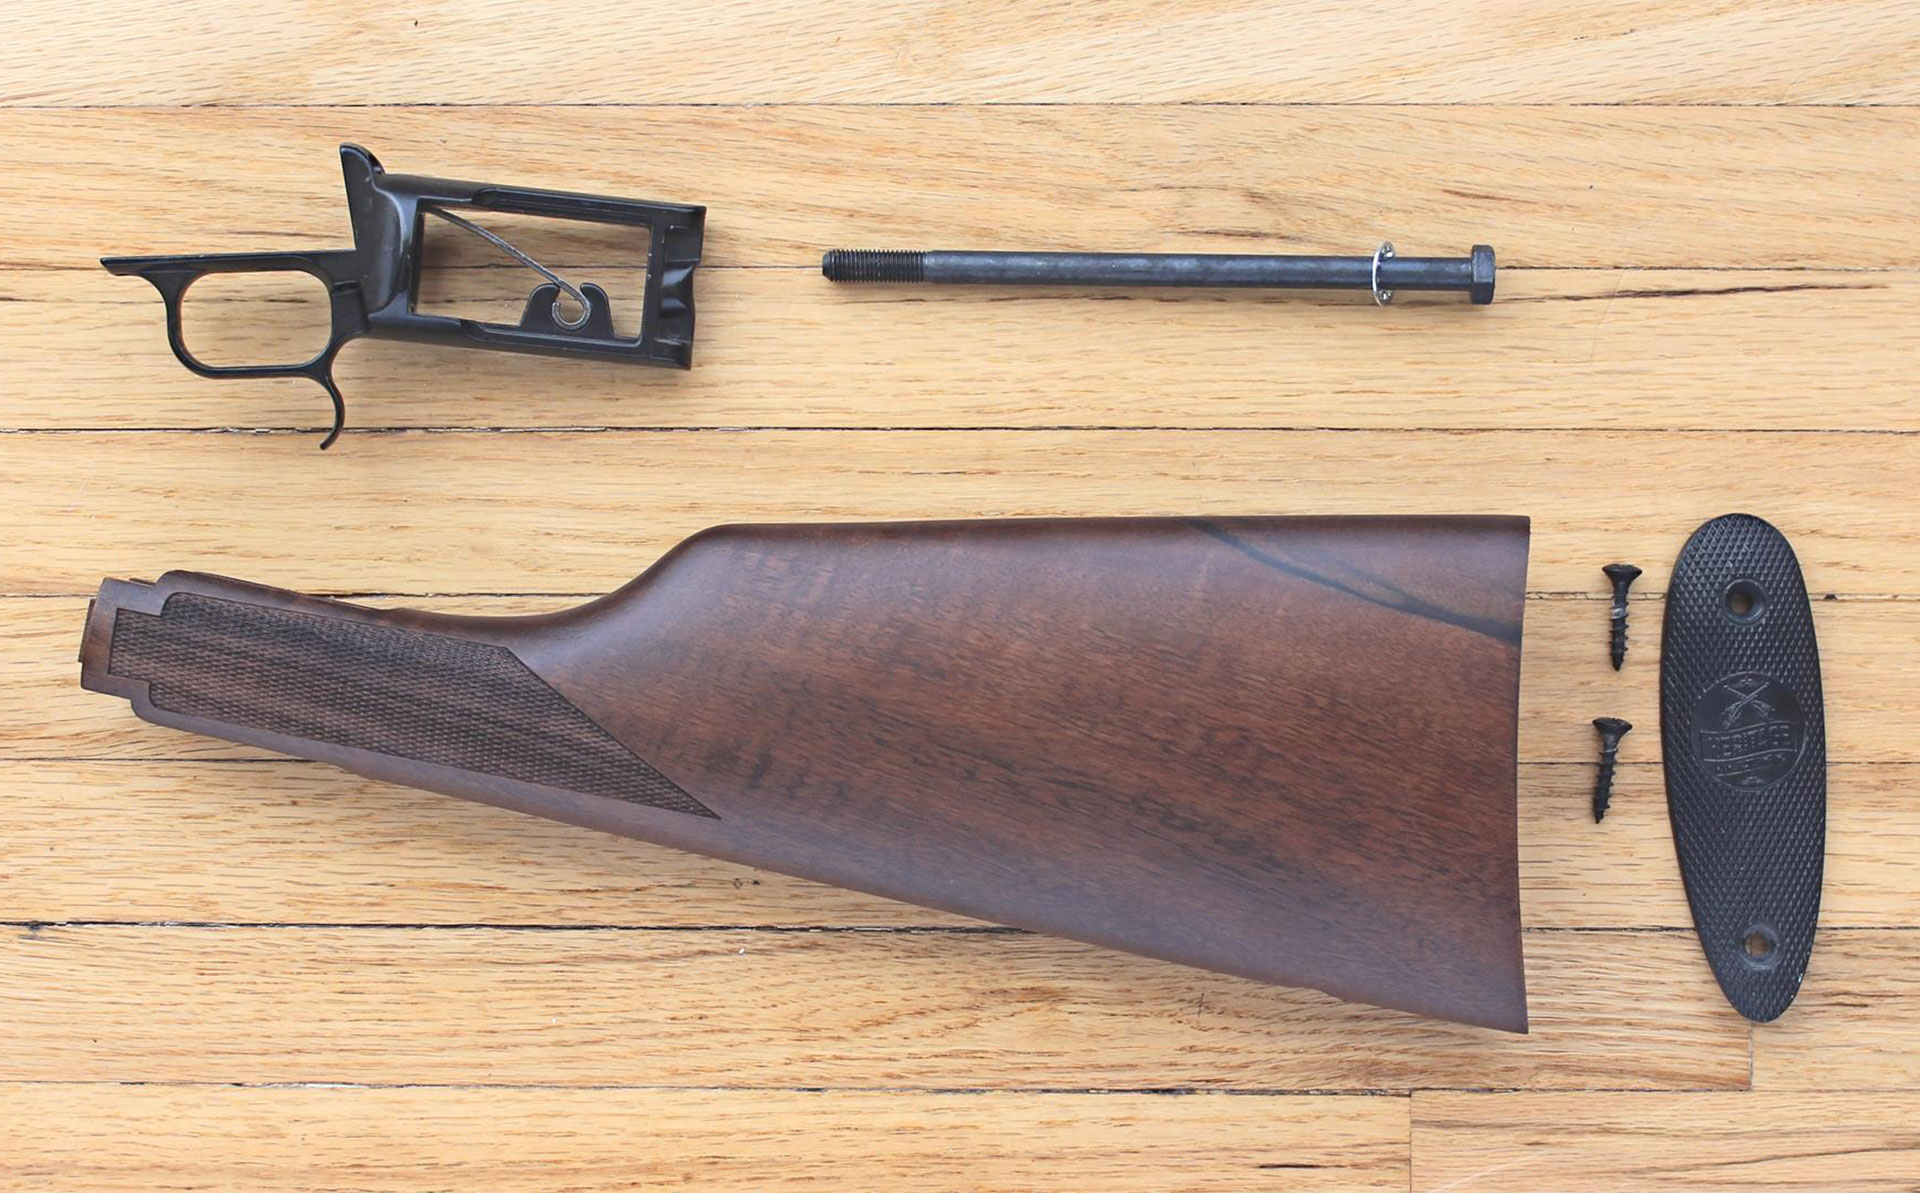 The Rancher backstrap assembly uses a long stock screw to support the walnut shoulder stock. The stock is capped off with a polymer buttplate supported by two-Philips head screws.